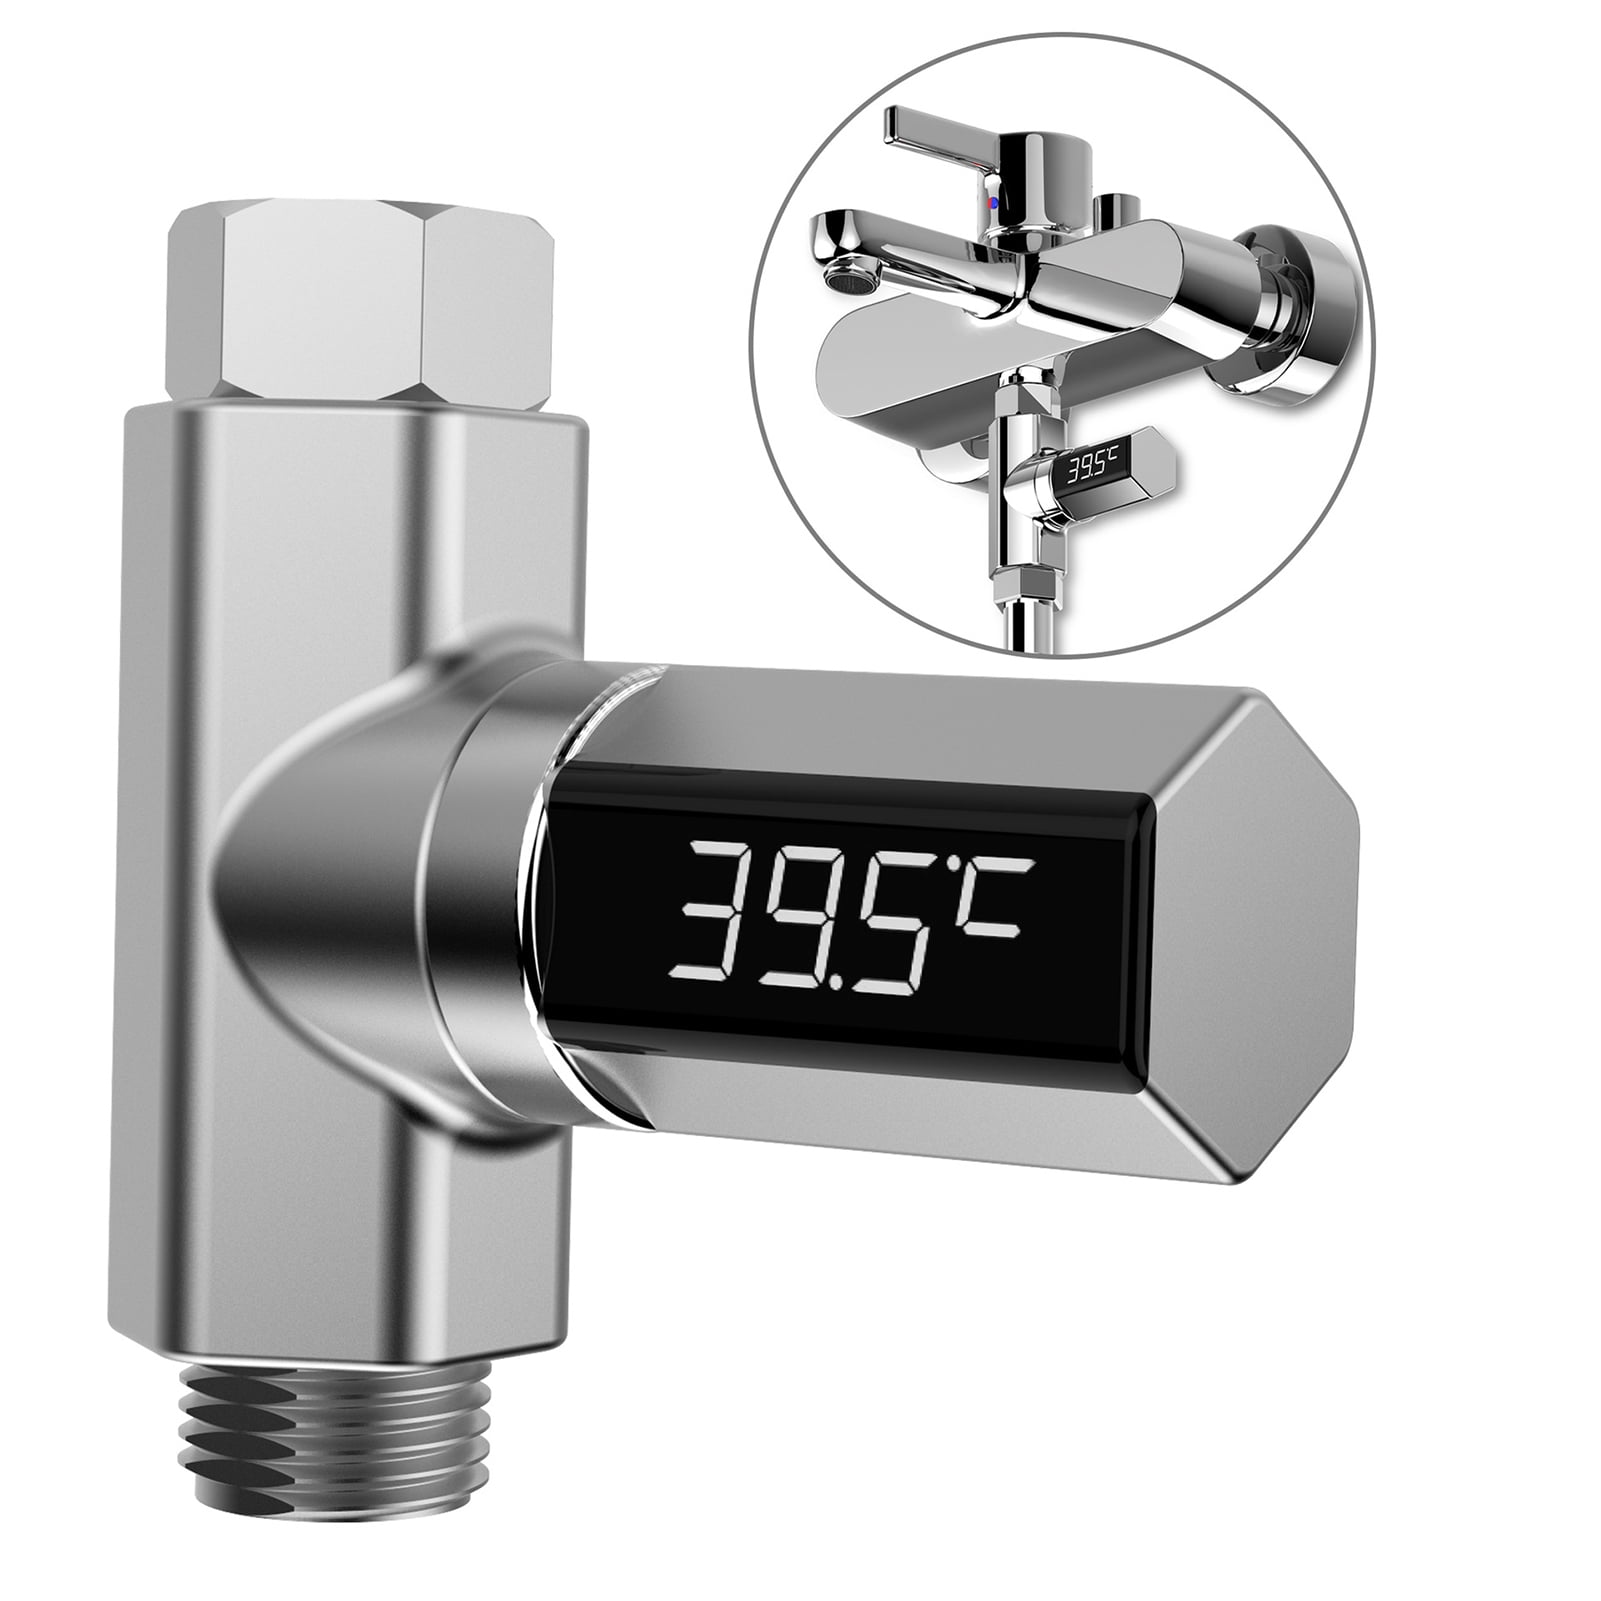 Electric Digital Shower Thermometer LED Display Water Flow Temperature Meter Monitor